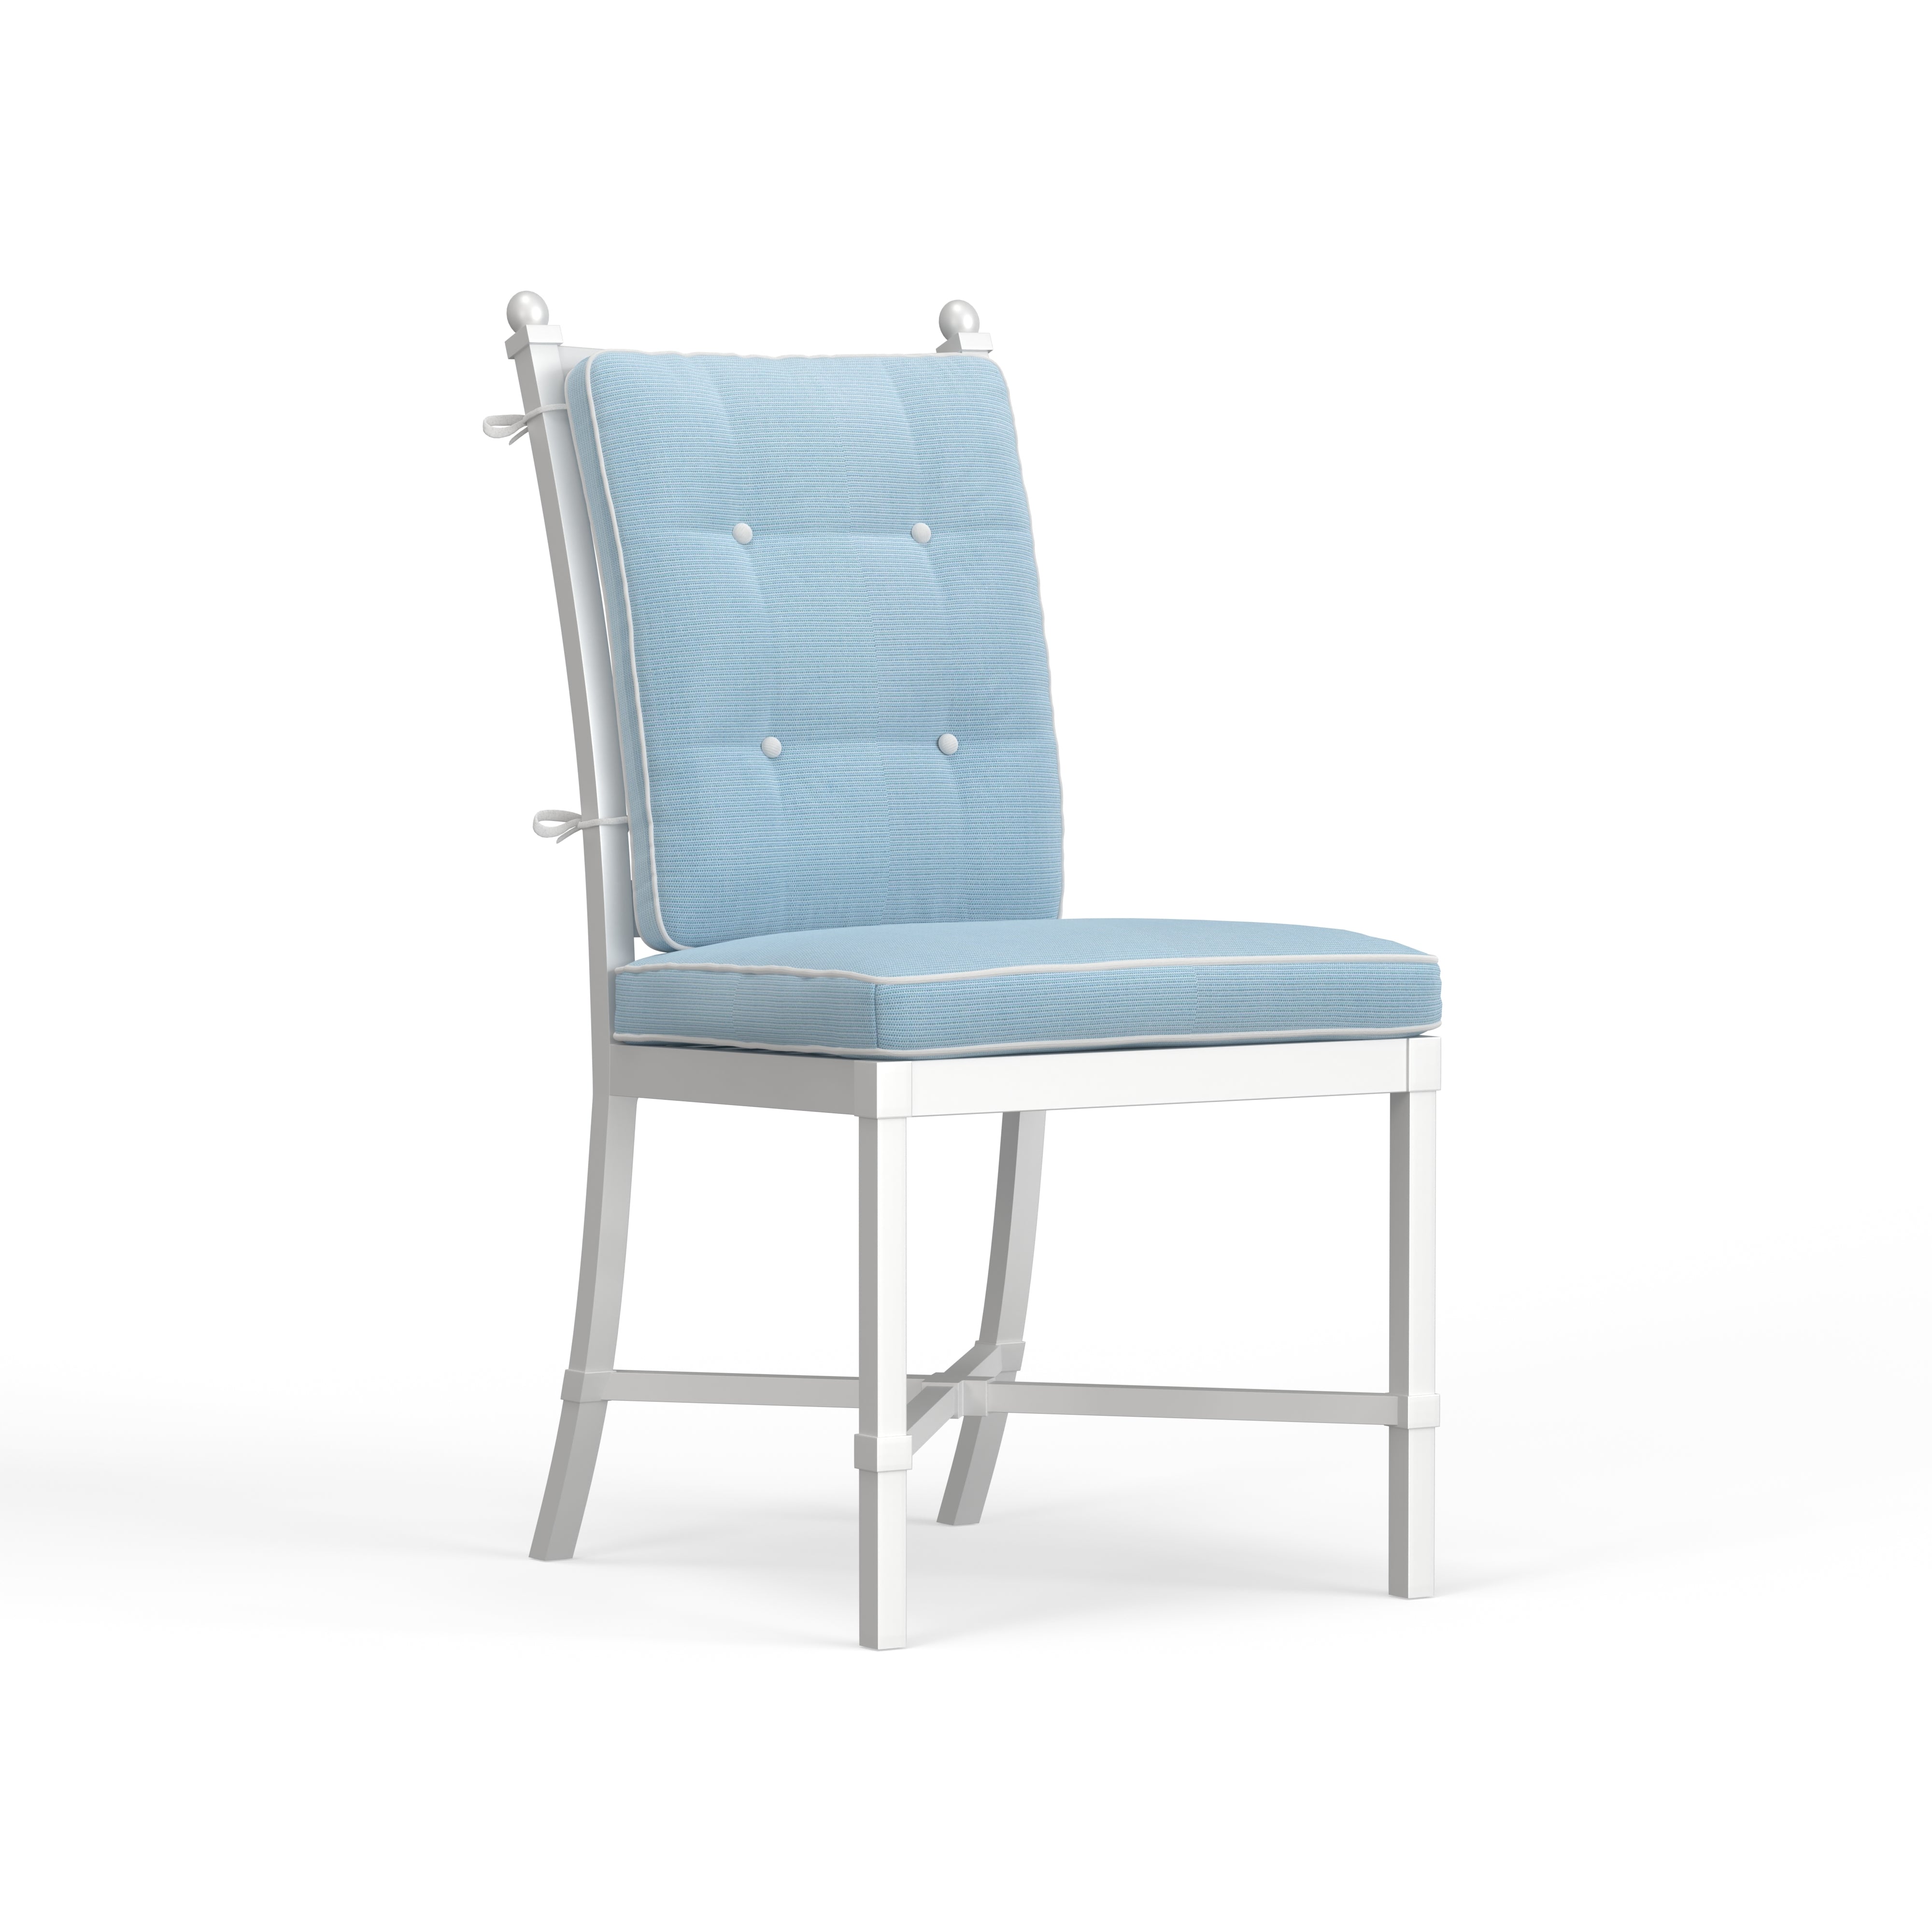 Riviera Outdoor Dining Side Chair